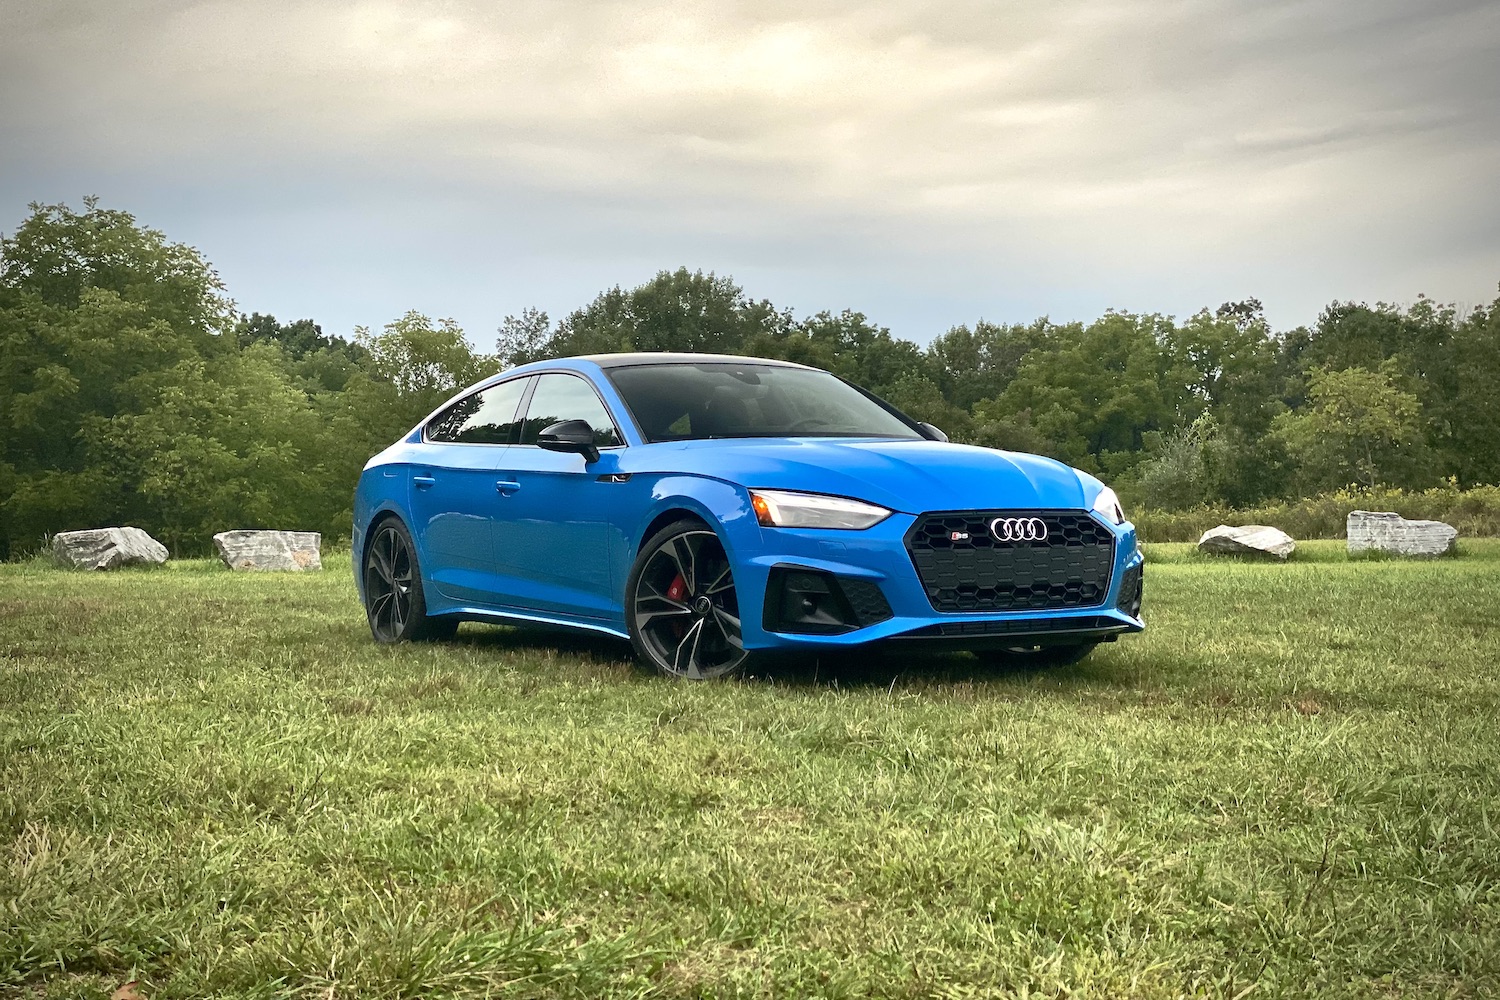 Angle of 2023 Audi S5 Sportback from passenger's side in a grassy field with trees in the back.